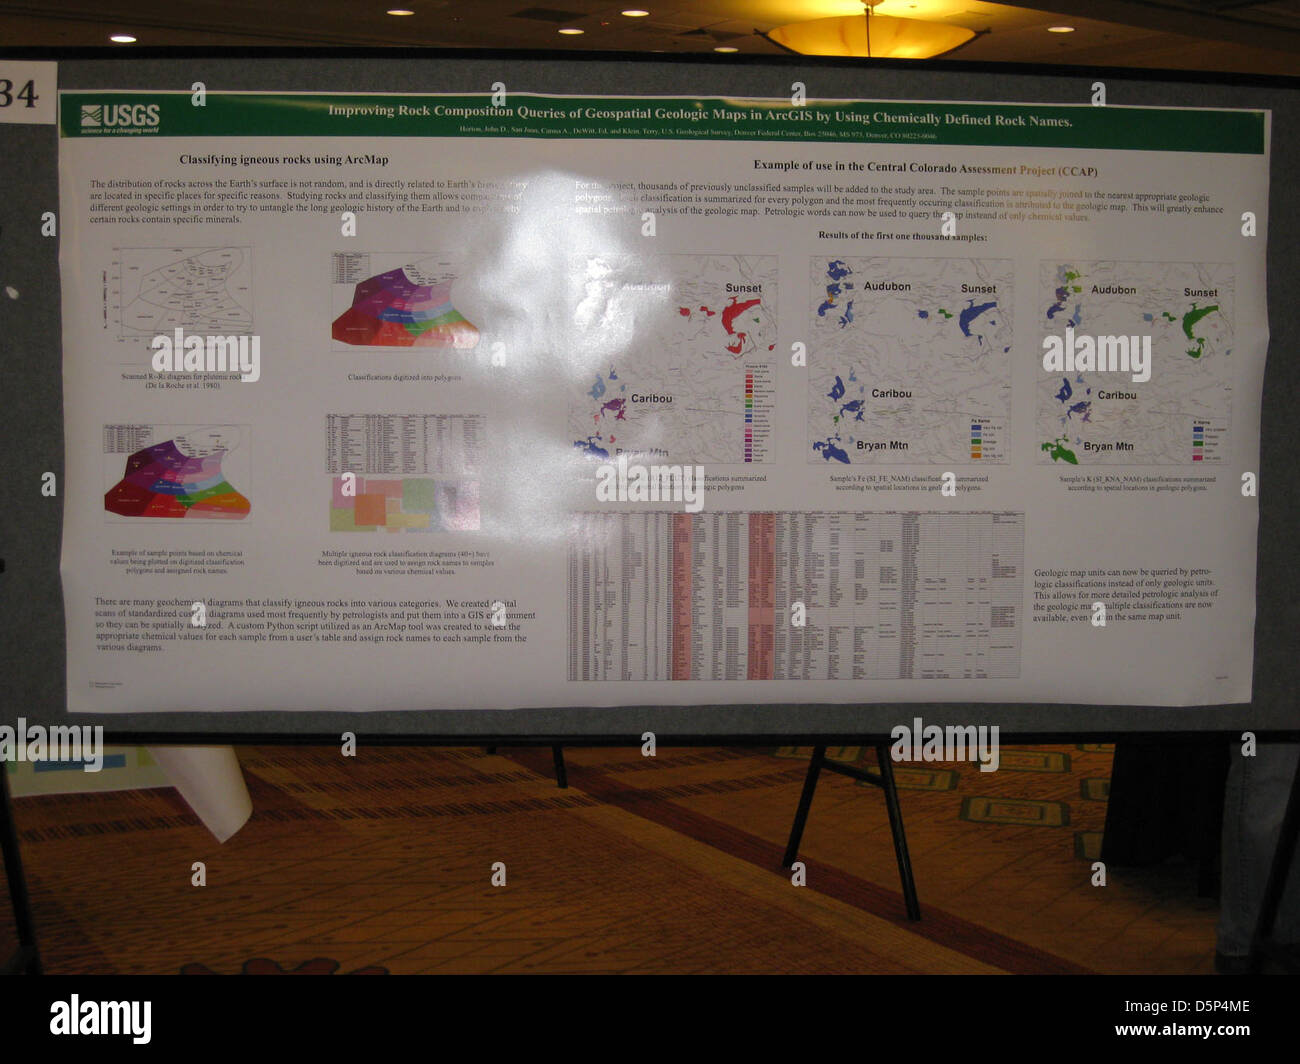 The conference geological map mapping national poster posters session survey tnm topographic us users usgs winning Stock Photo